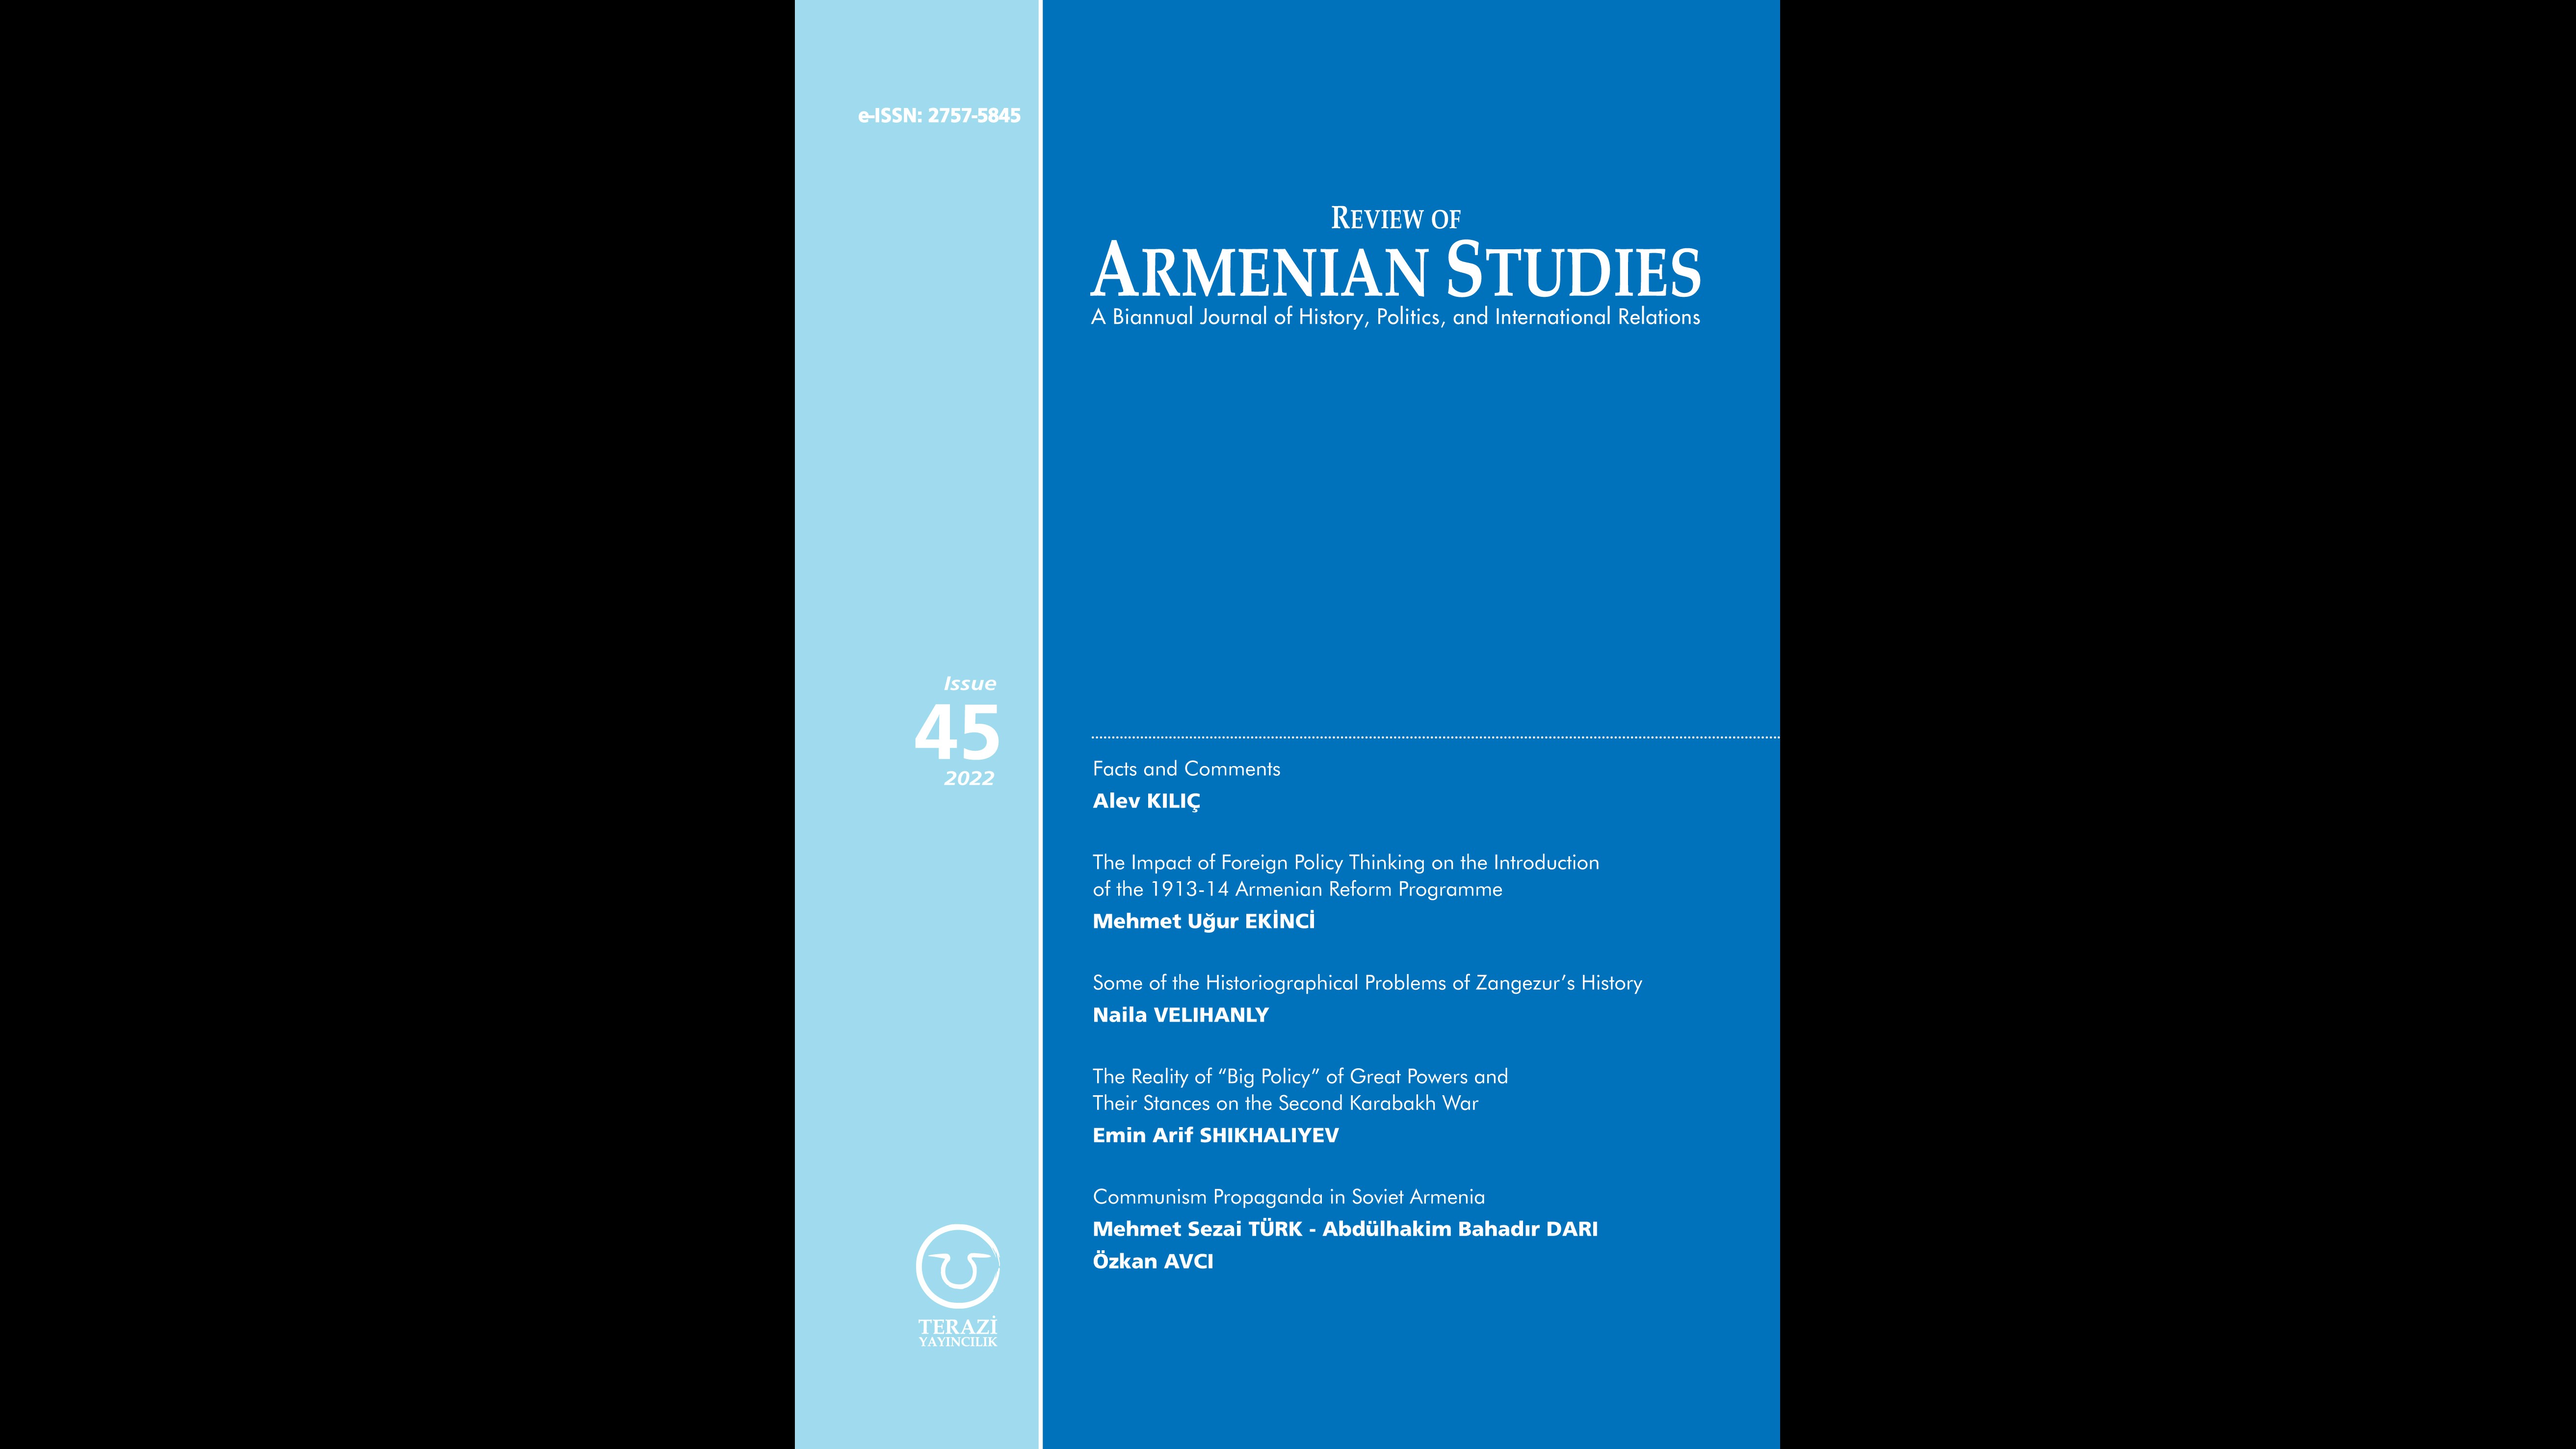 ANNOUNCEMENT: THE 45TH ISSUE OF THE REVIEW OF ARMENIAN STUDIES JOURNAL HAS BEEN PUBLISHED